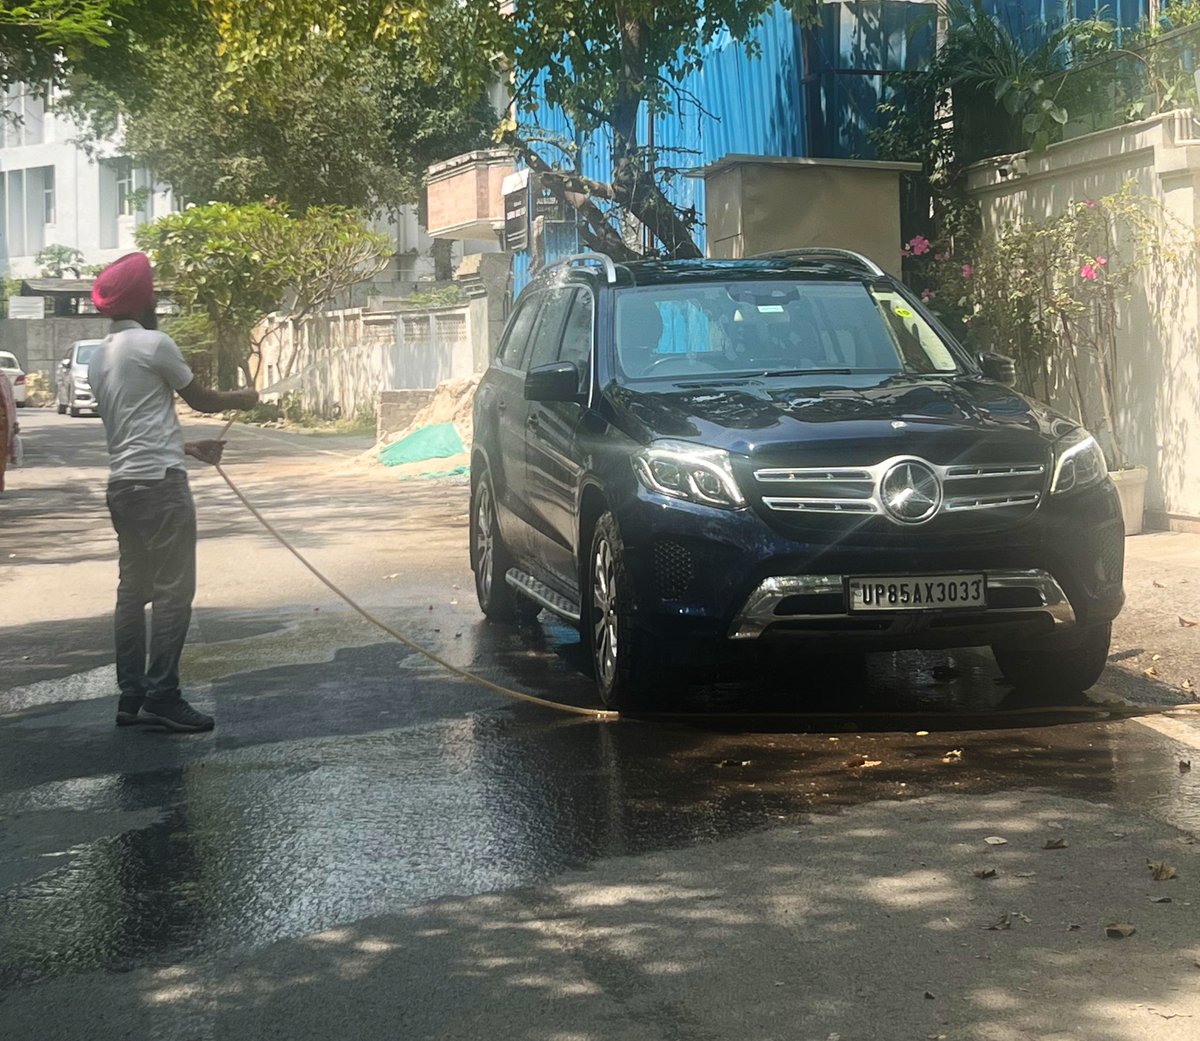 I request this person not to use a hose pipe to wash d car, pointing out d rivulet he has created. Water is very scarce, I remind him. We don’t get water in this neighbourhood daily, I say. He points to his car and suggests I took a look at the brand first. @MercedesBenzInd